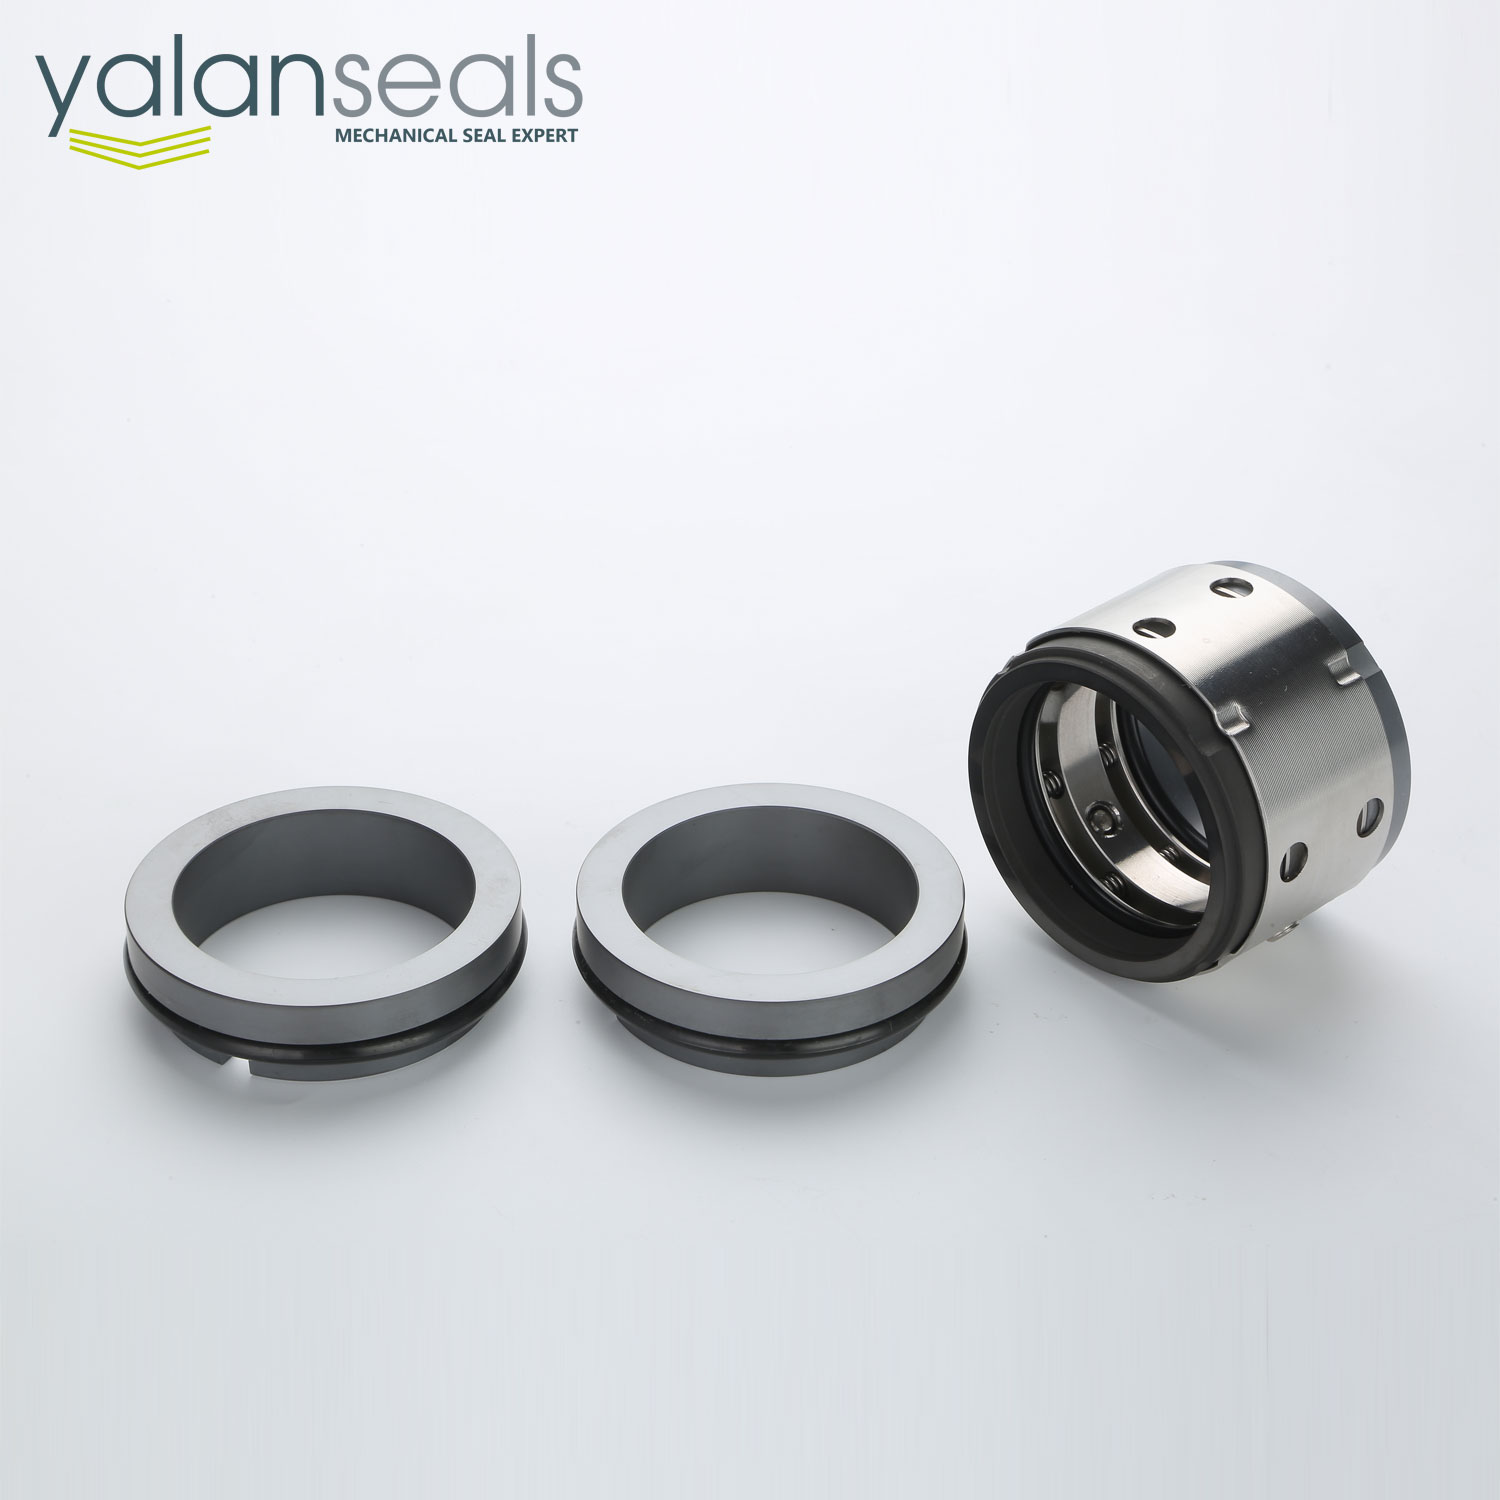 M74RD Double Mechanical Seal